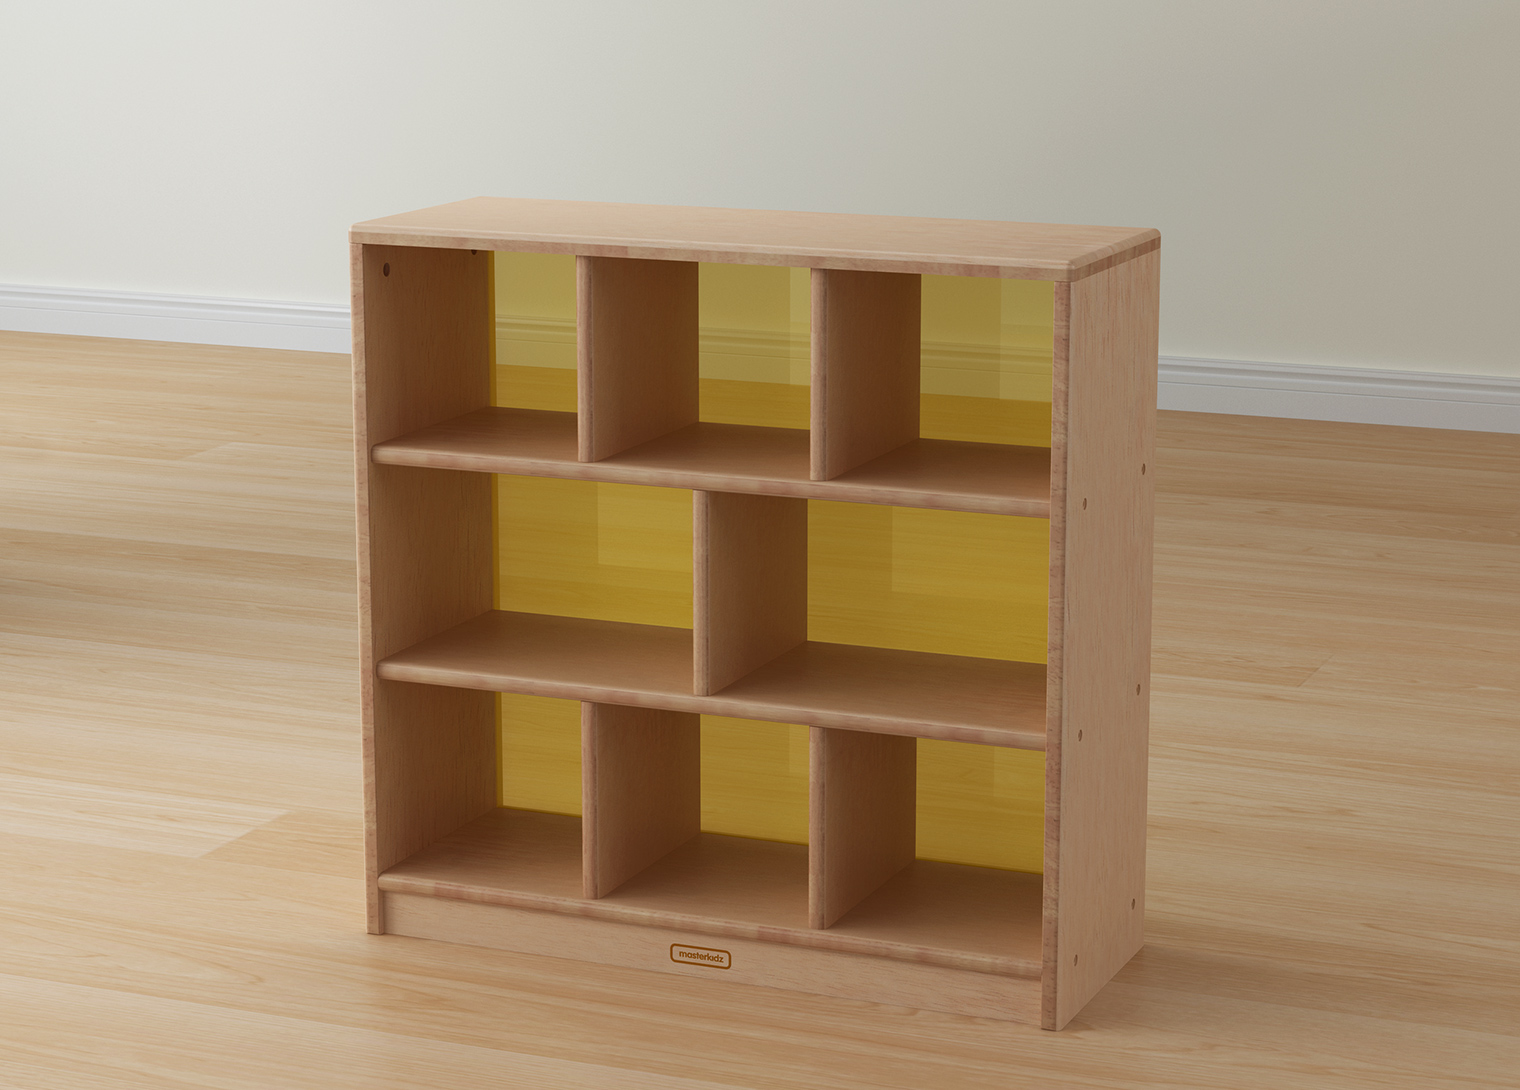 Bern - 789H x 810L Natural Rubber Wood  8-Compartment Shelving Unit - Translucent Yellow Back